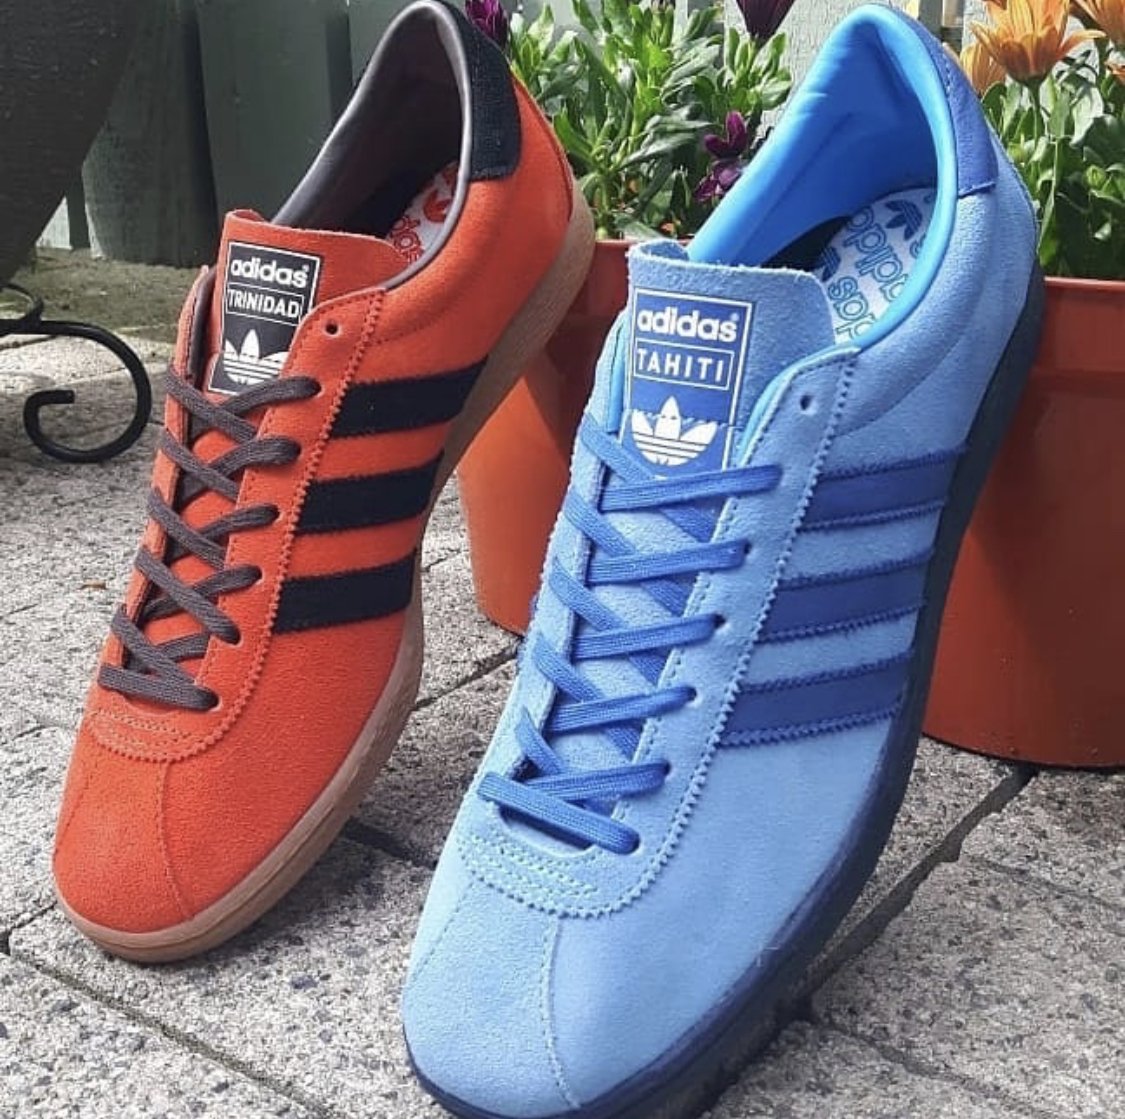 The Casuals Directory on Twitter: "Adidas Trinidad and Tahiti Pic Credit:  @bernie3stripes instagram https://t.co/xiLaHf2b87" / Twitter